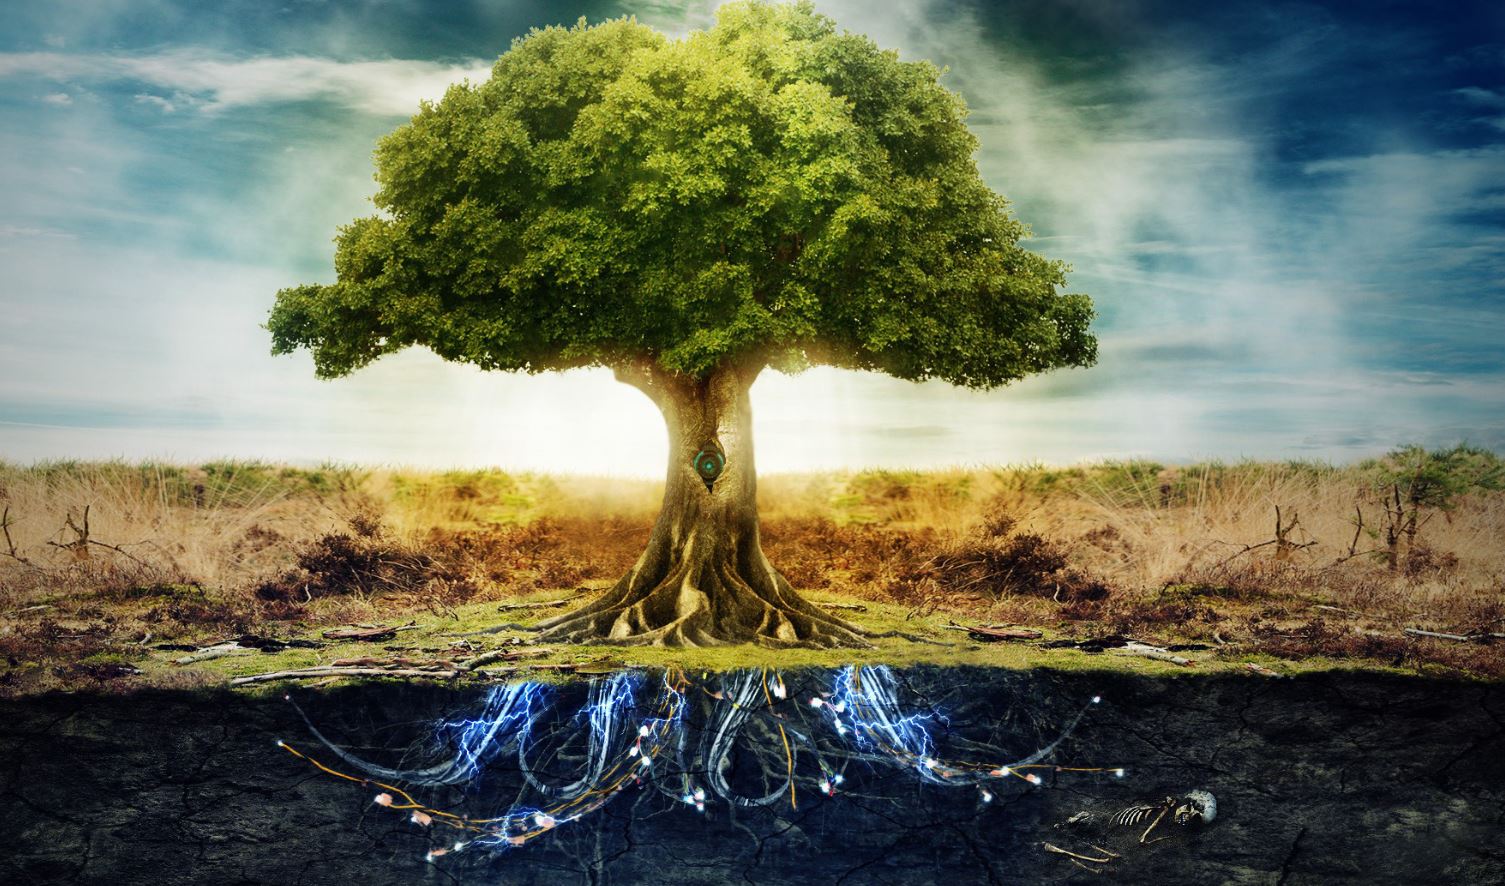 5-Things-You-Need-to-Know-About-The-Tree-of-Life.jpg (1505×886)